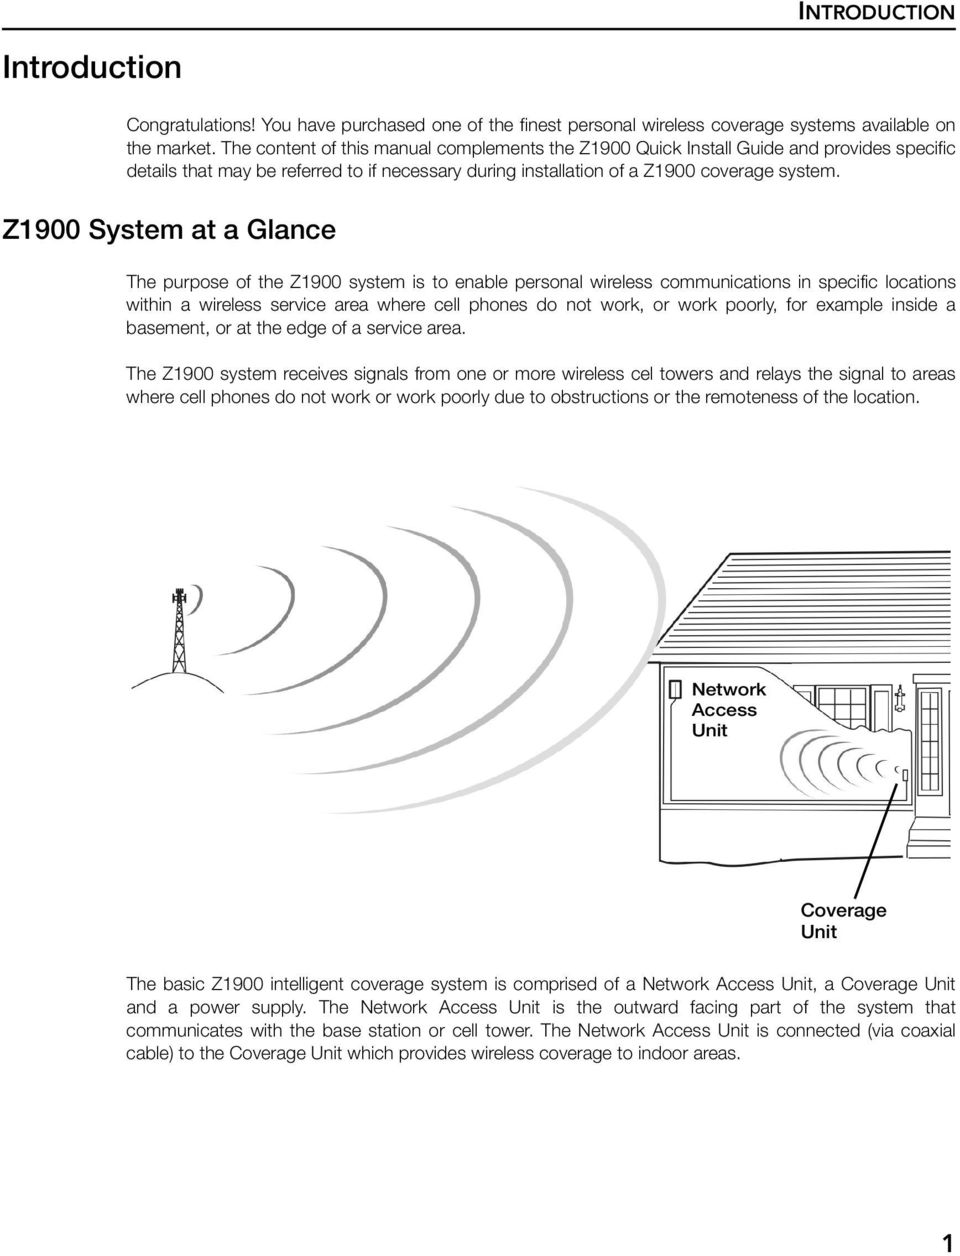 Z1900 System at a Glance The purpose of the Z1900 system is to enable personal wireless communications in specific locations within a wireless service area where cell phones do not work, or work